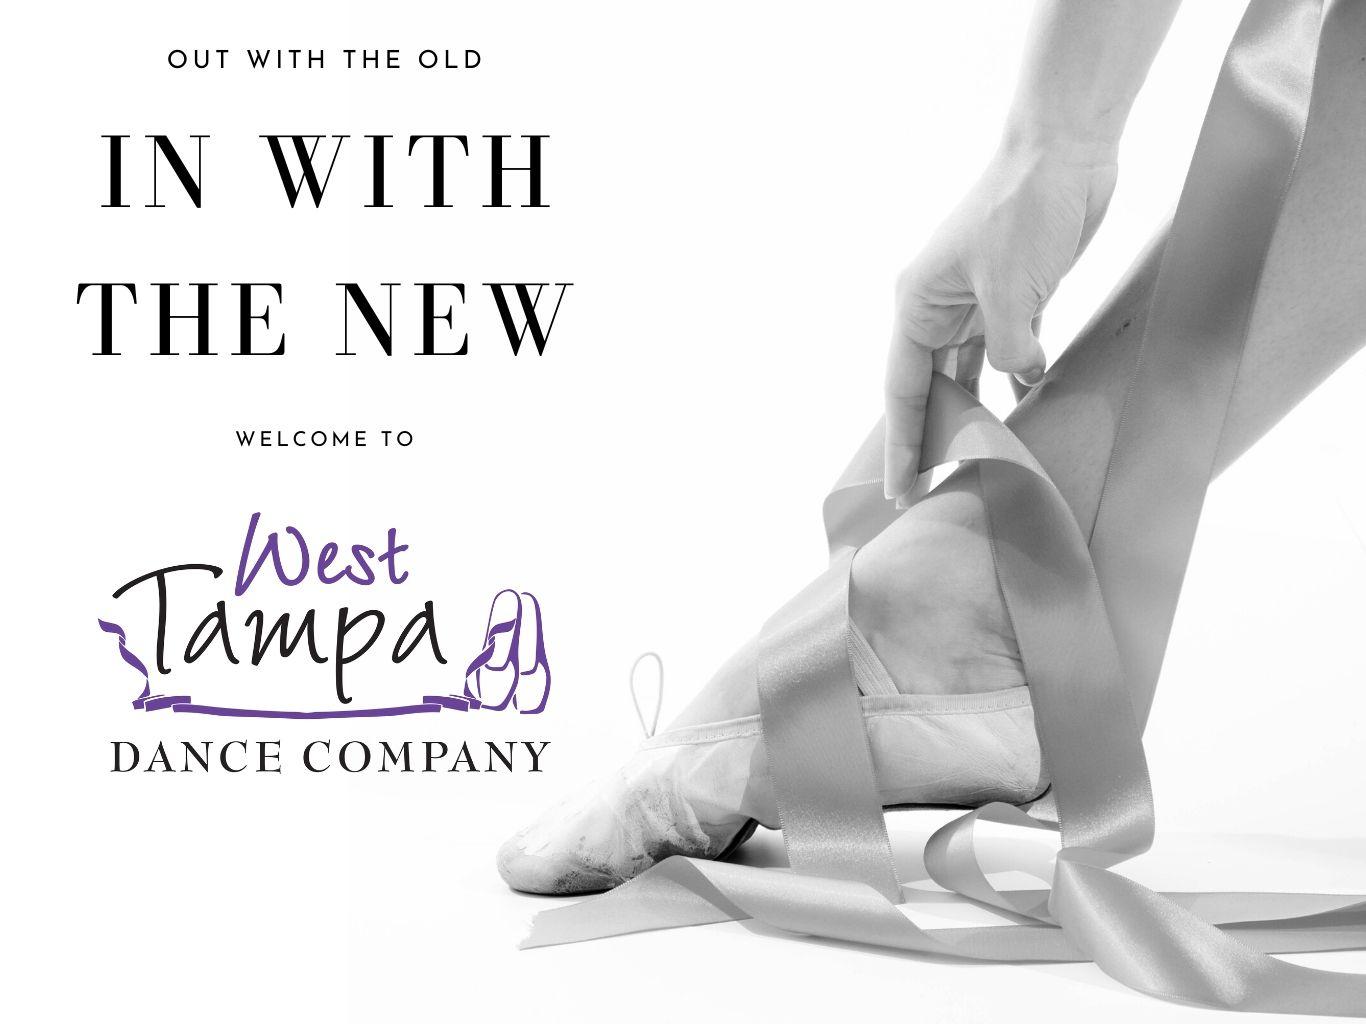 Out with the old. In with the new. Welcome to West Tampa Dance Company.